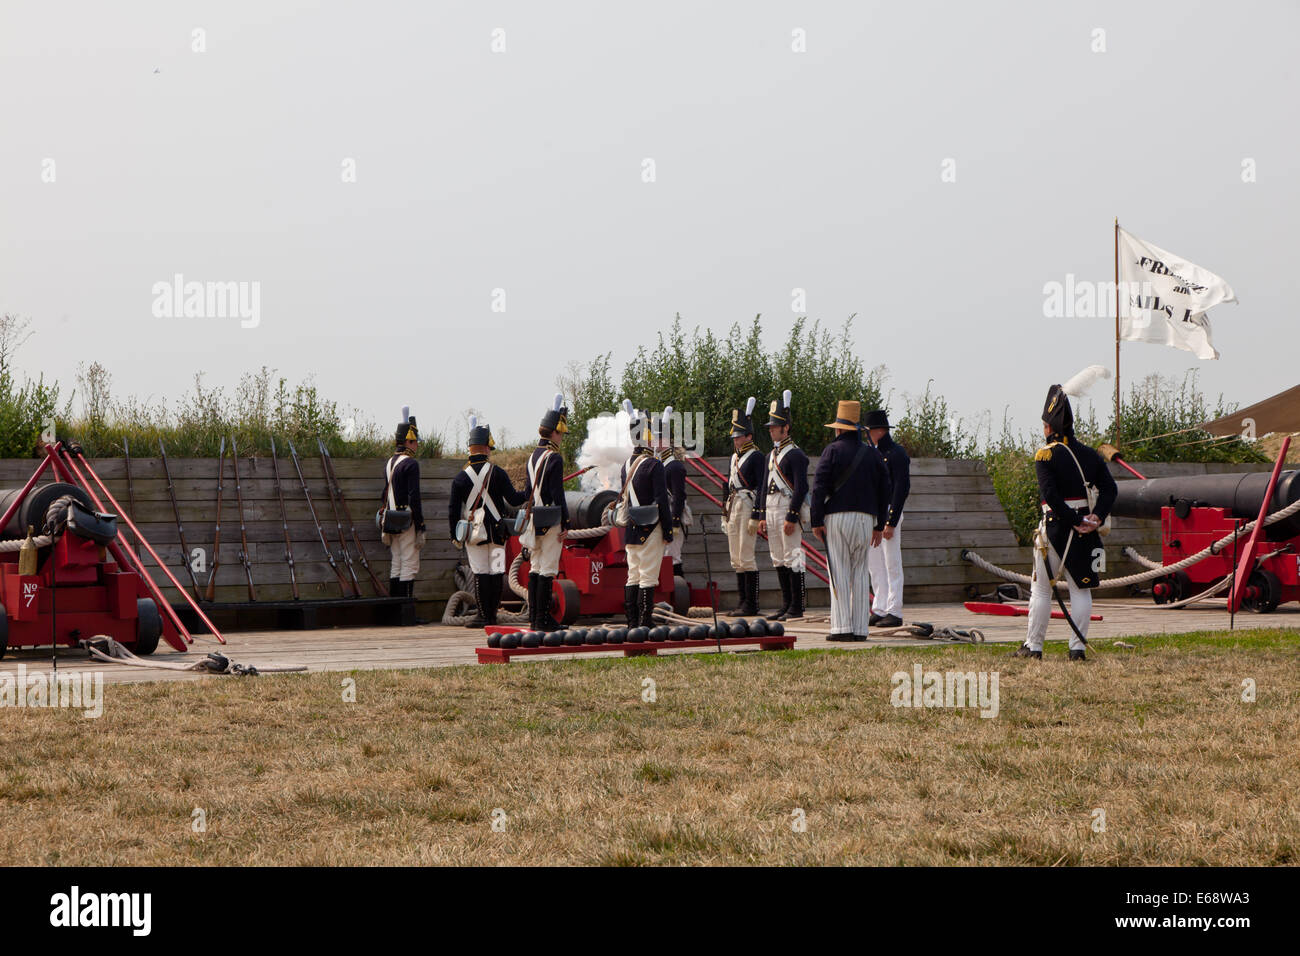 The reenactors lighting the fuze on a cannon during the demonstration Fort McHenry National Historic Site in Baltimore, Maryland Stock Photo